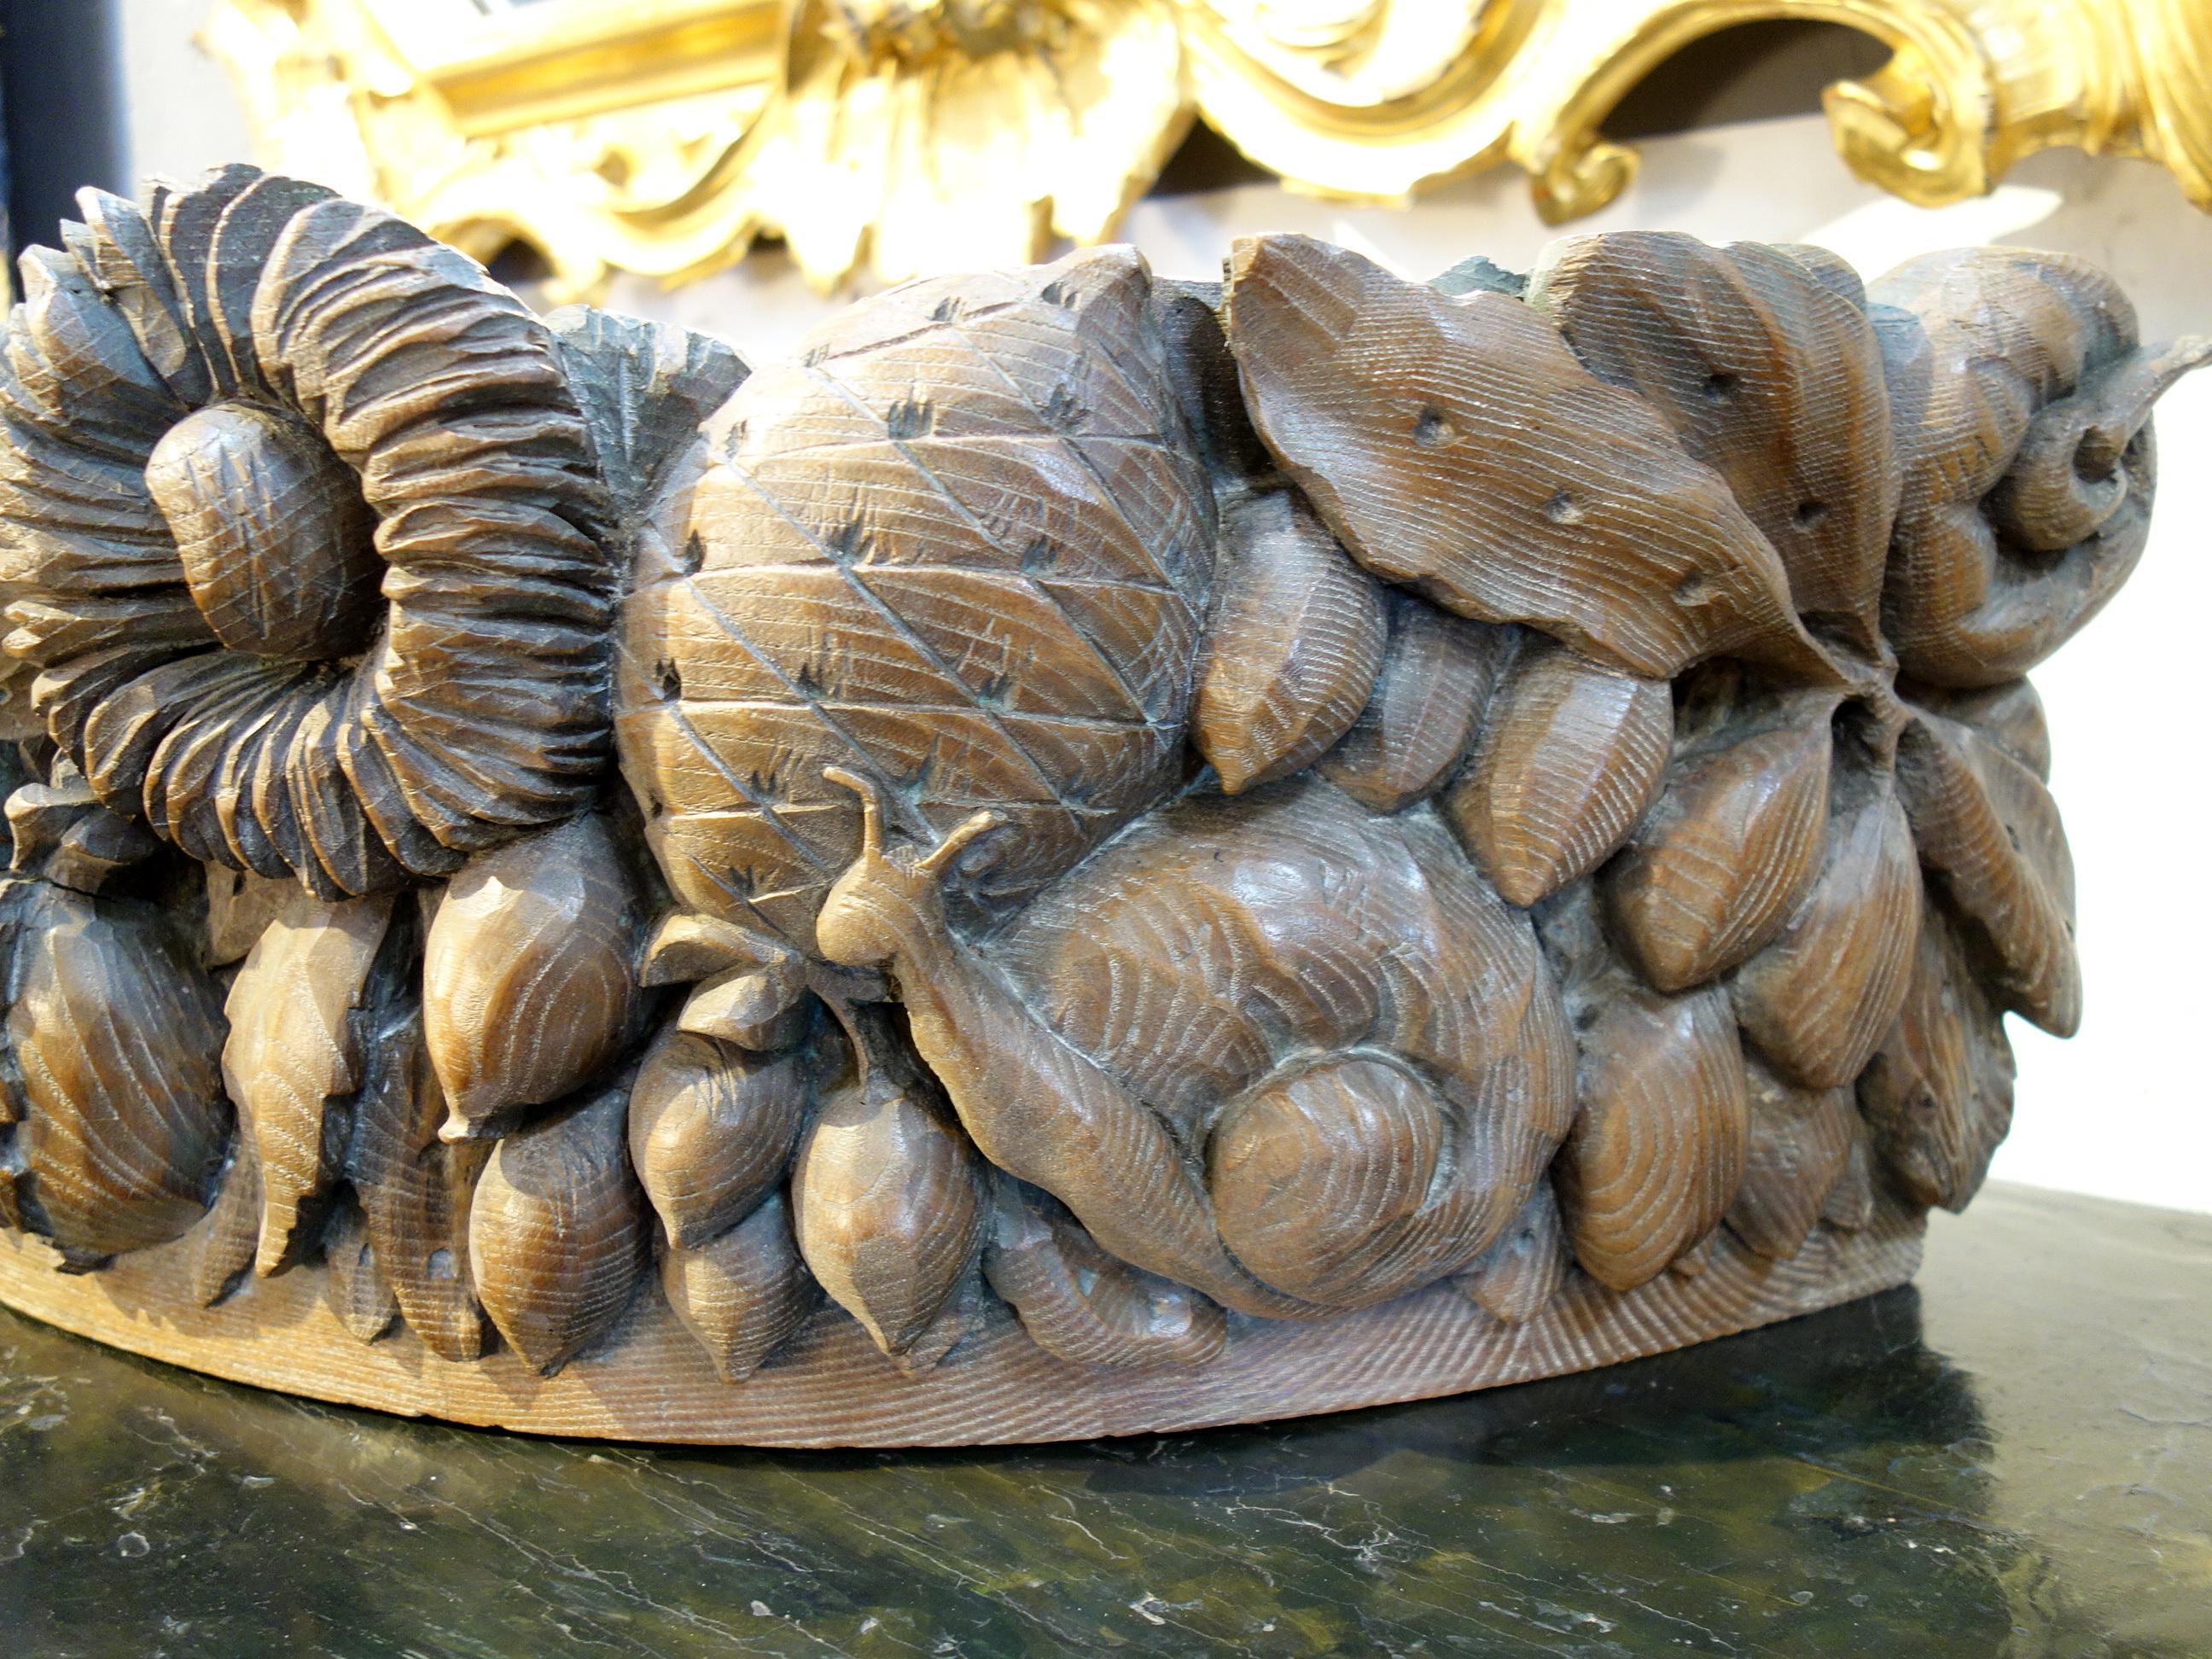 19th century Italian Baroque style ornately solid carved capital frieze element with florals & foliage. Arc-shaped old chestnut with highly developed bronze-like patina from aging. Recognized in the classical architecture of Ancient Greece and Rome,